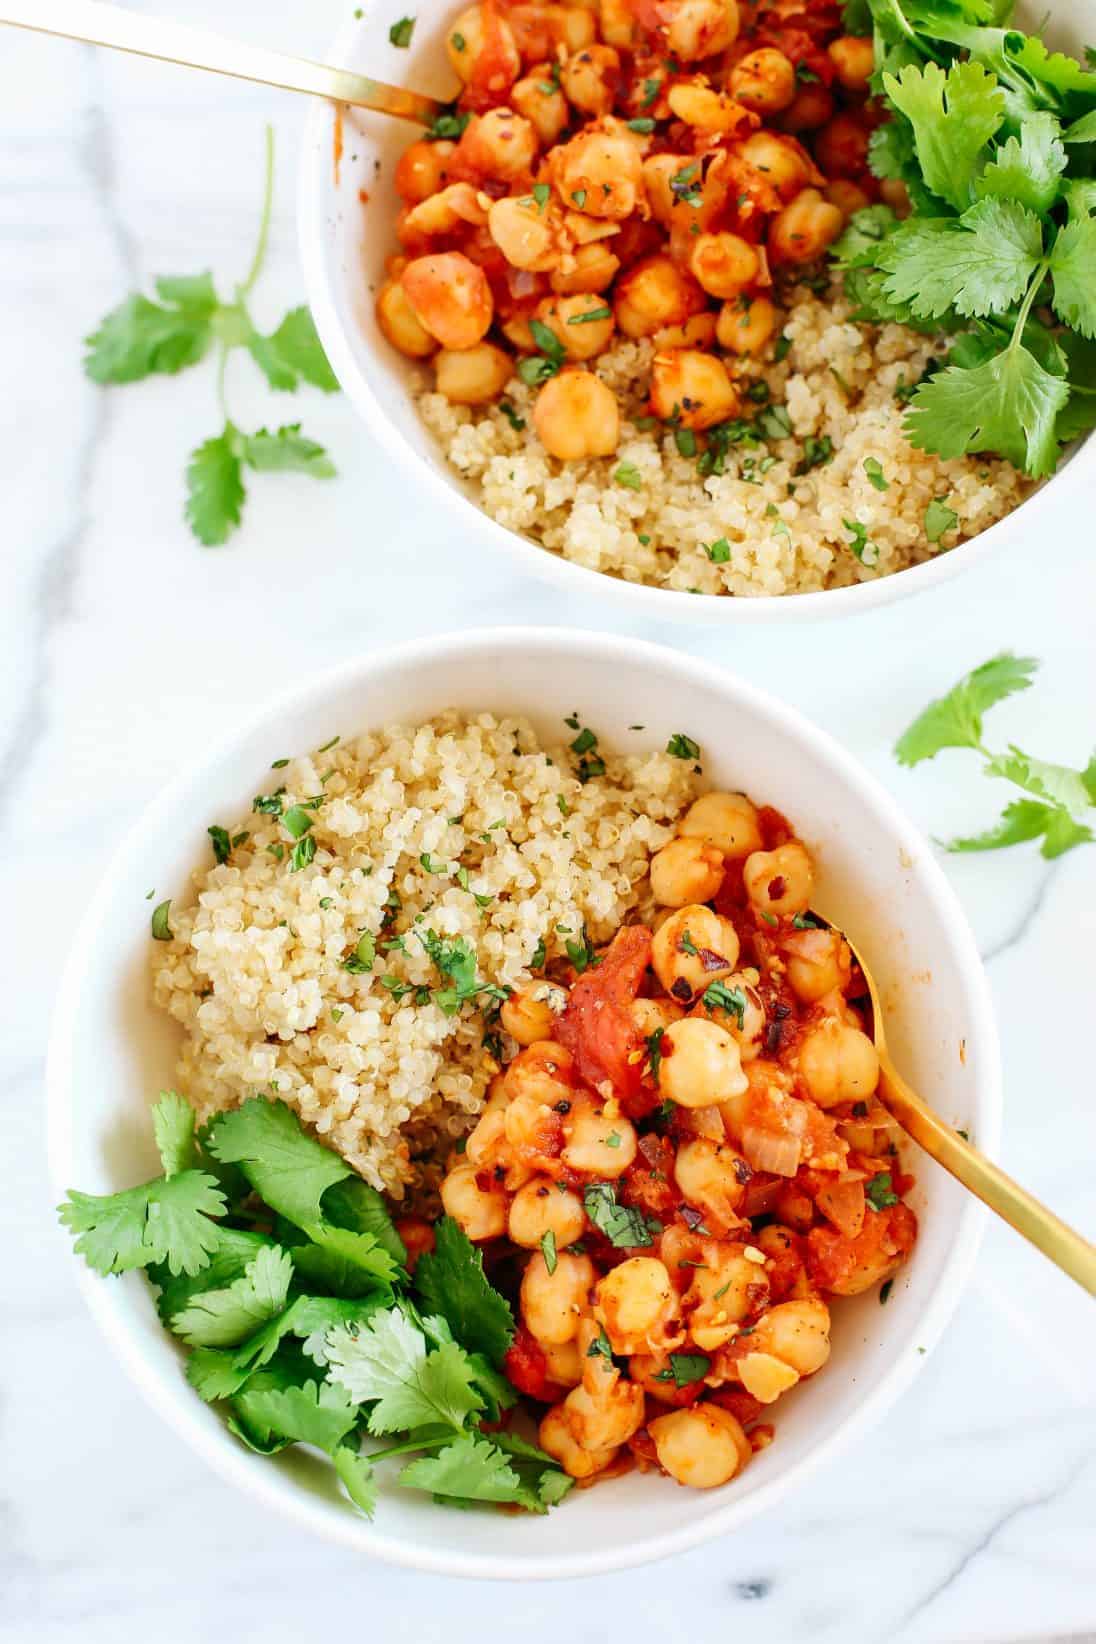 Spicy chickpea bowl with quinoa